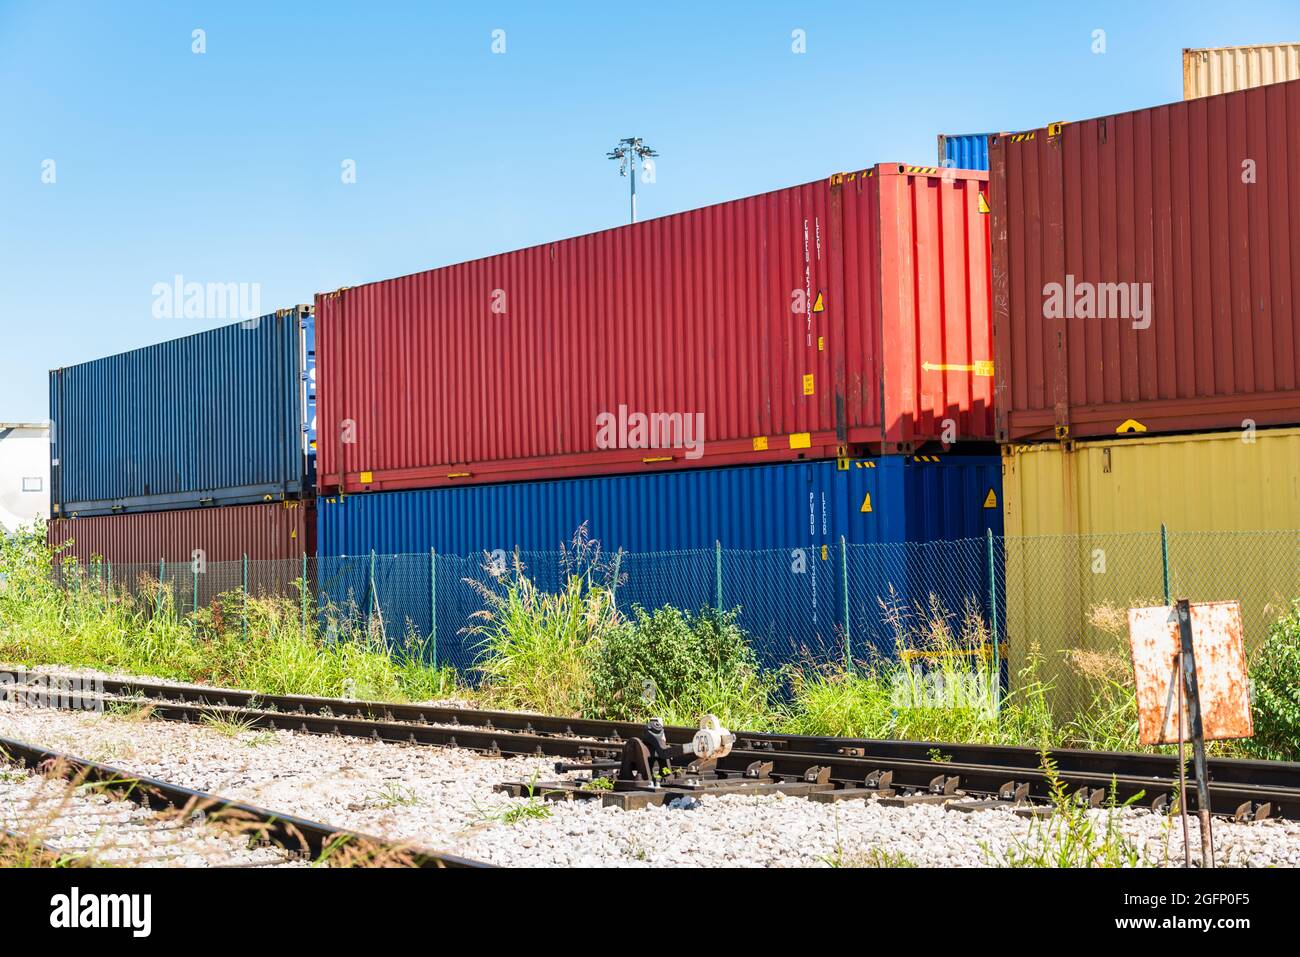 Stack of colourdul cargo containers in a fenced cargo terminal on a sunny summer day. Railway tracks are in foreground. Stock Photo